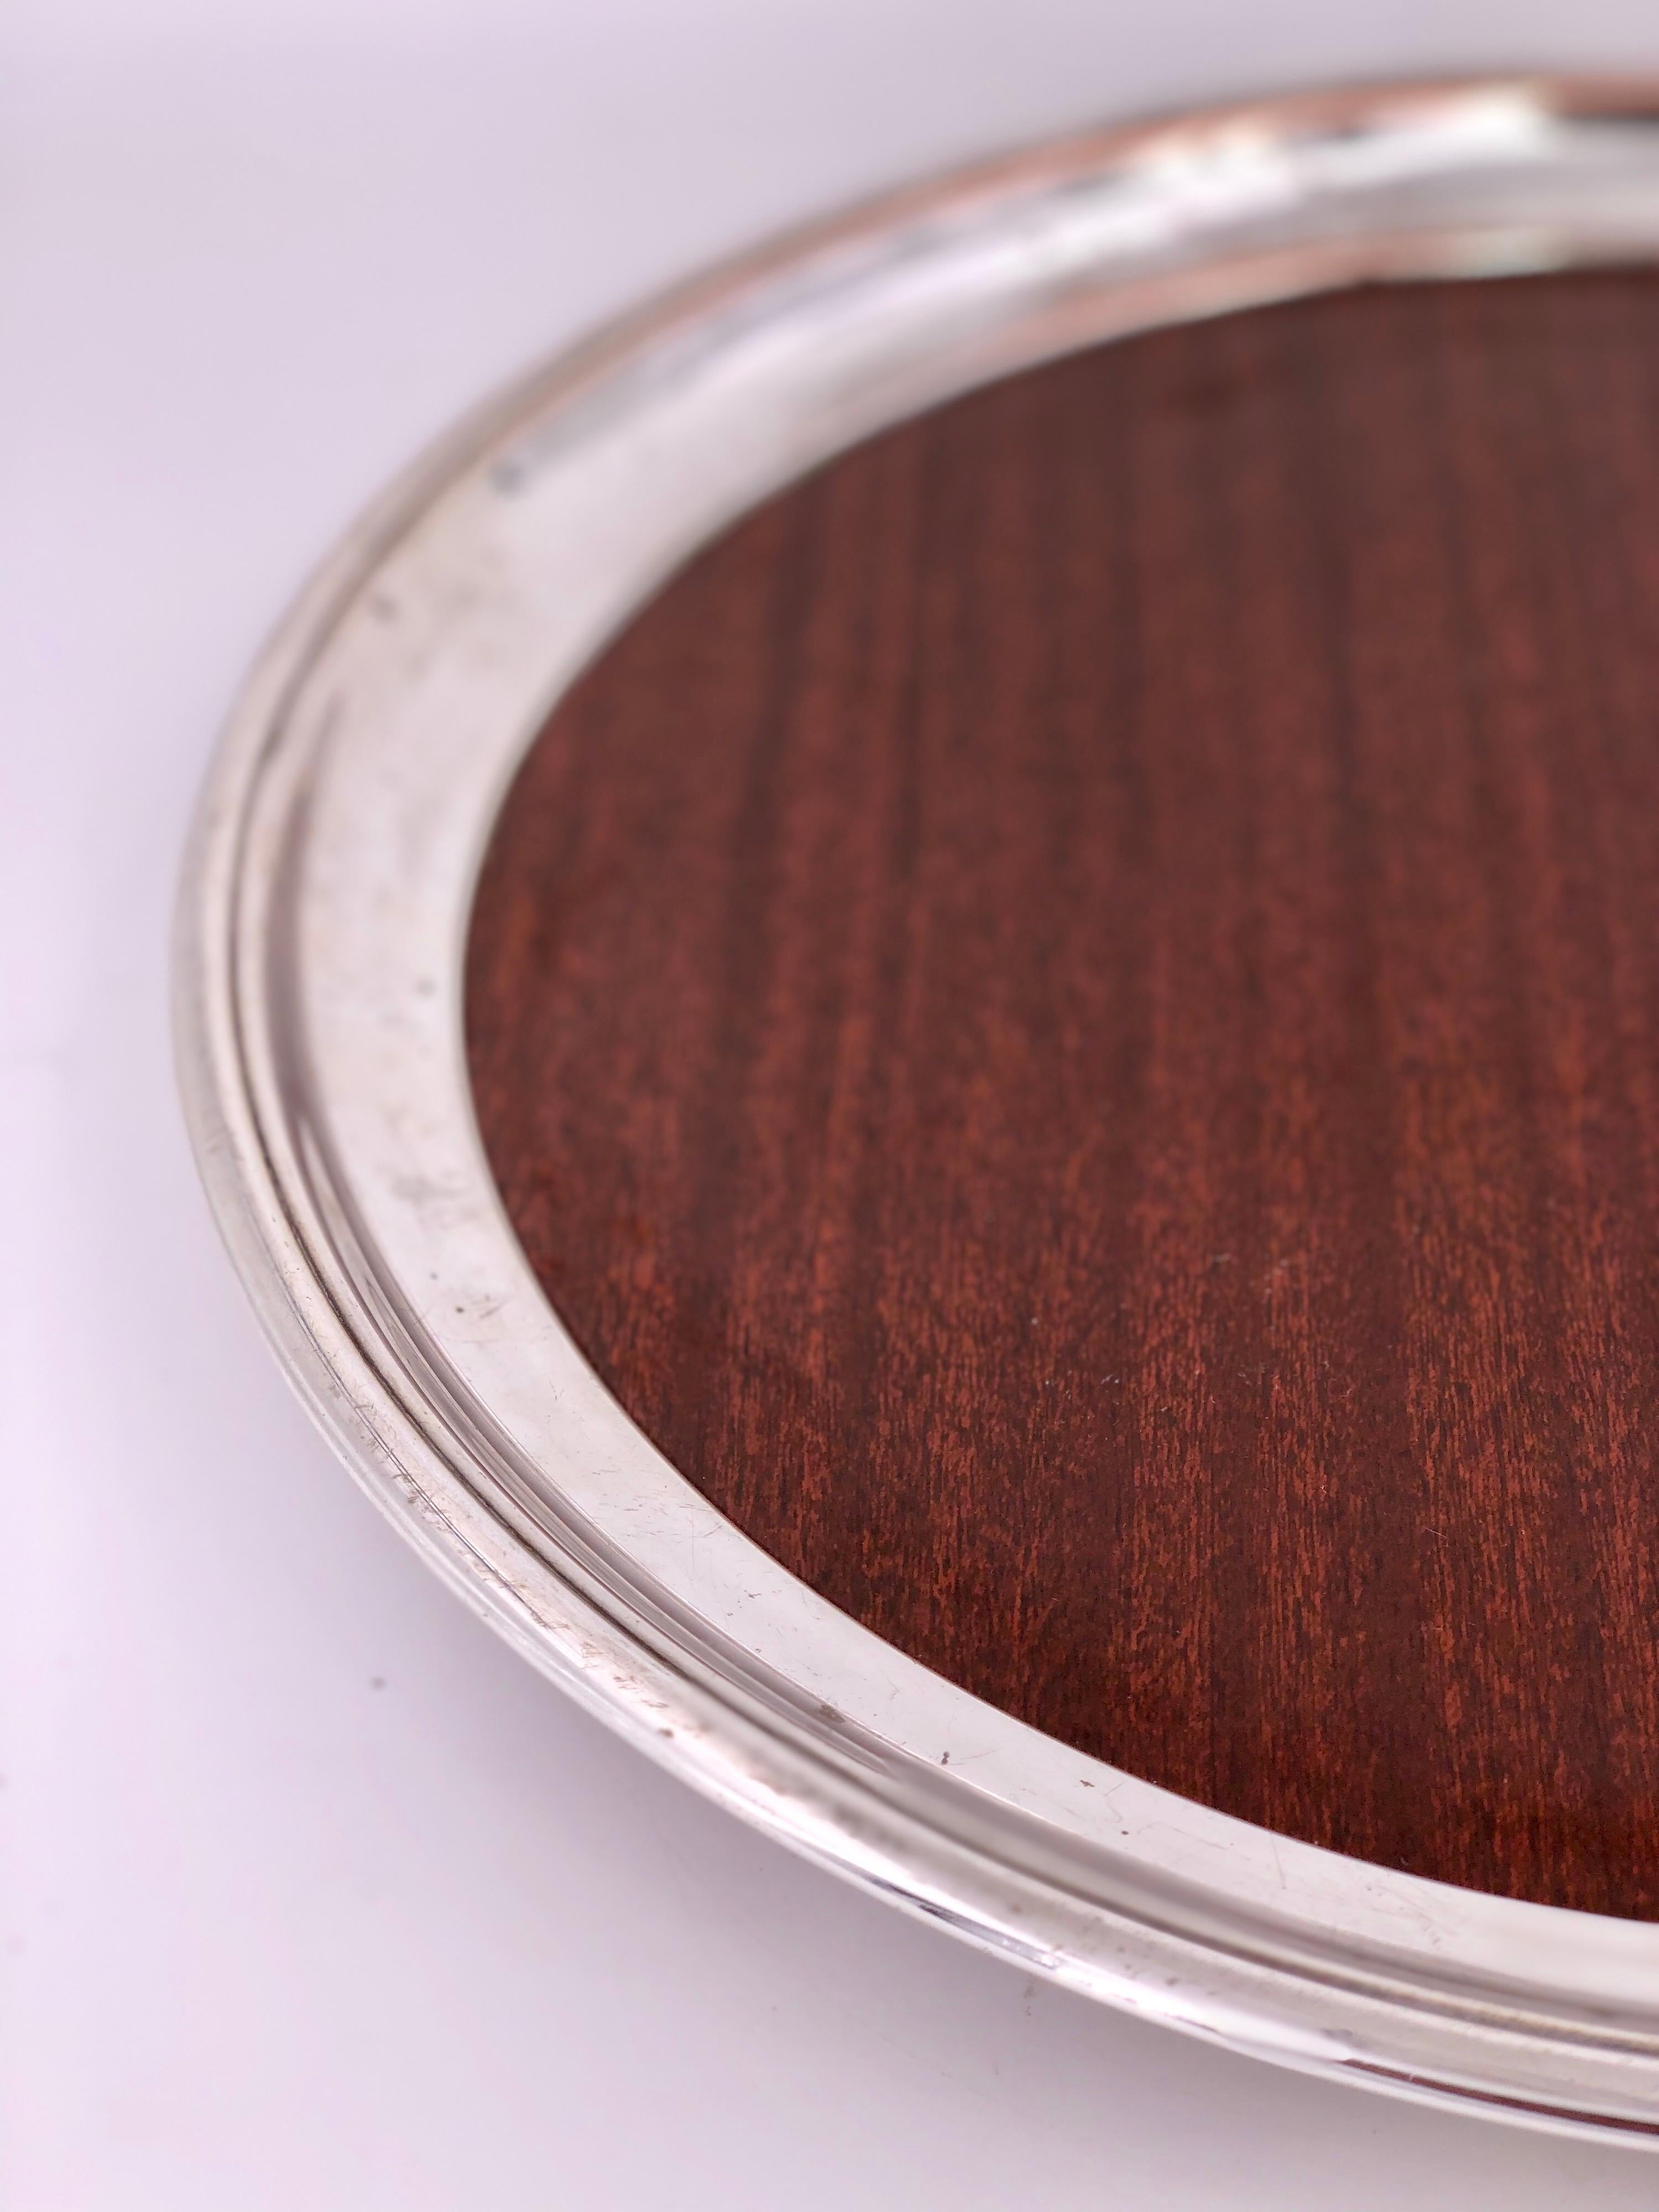 A beautiful Art Deco silver plated tray with raised edge, and faux rosewood laminate very nice and clean condition. By Crescent.